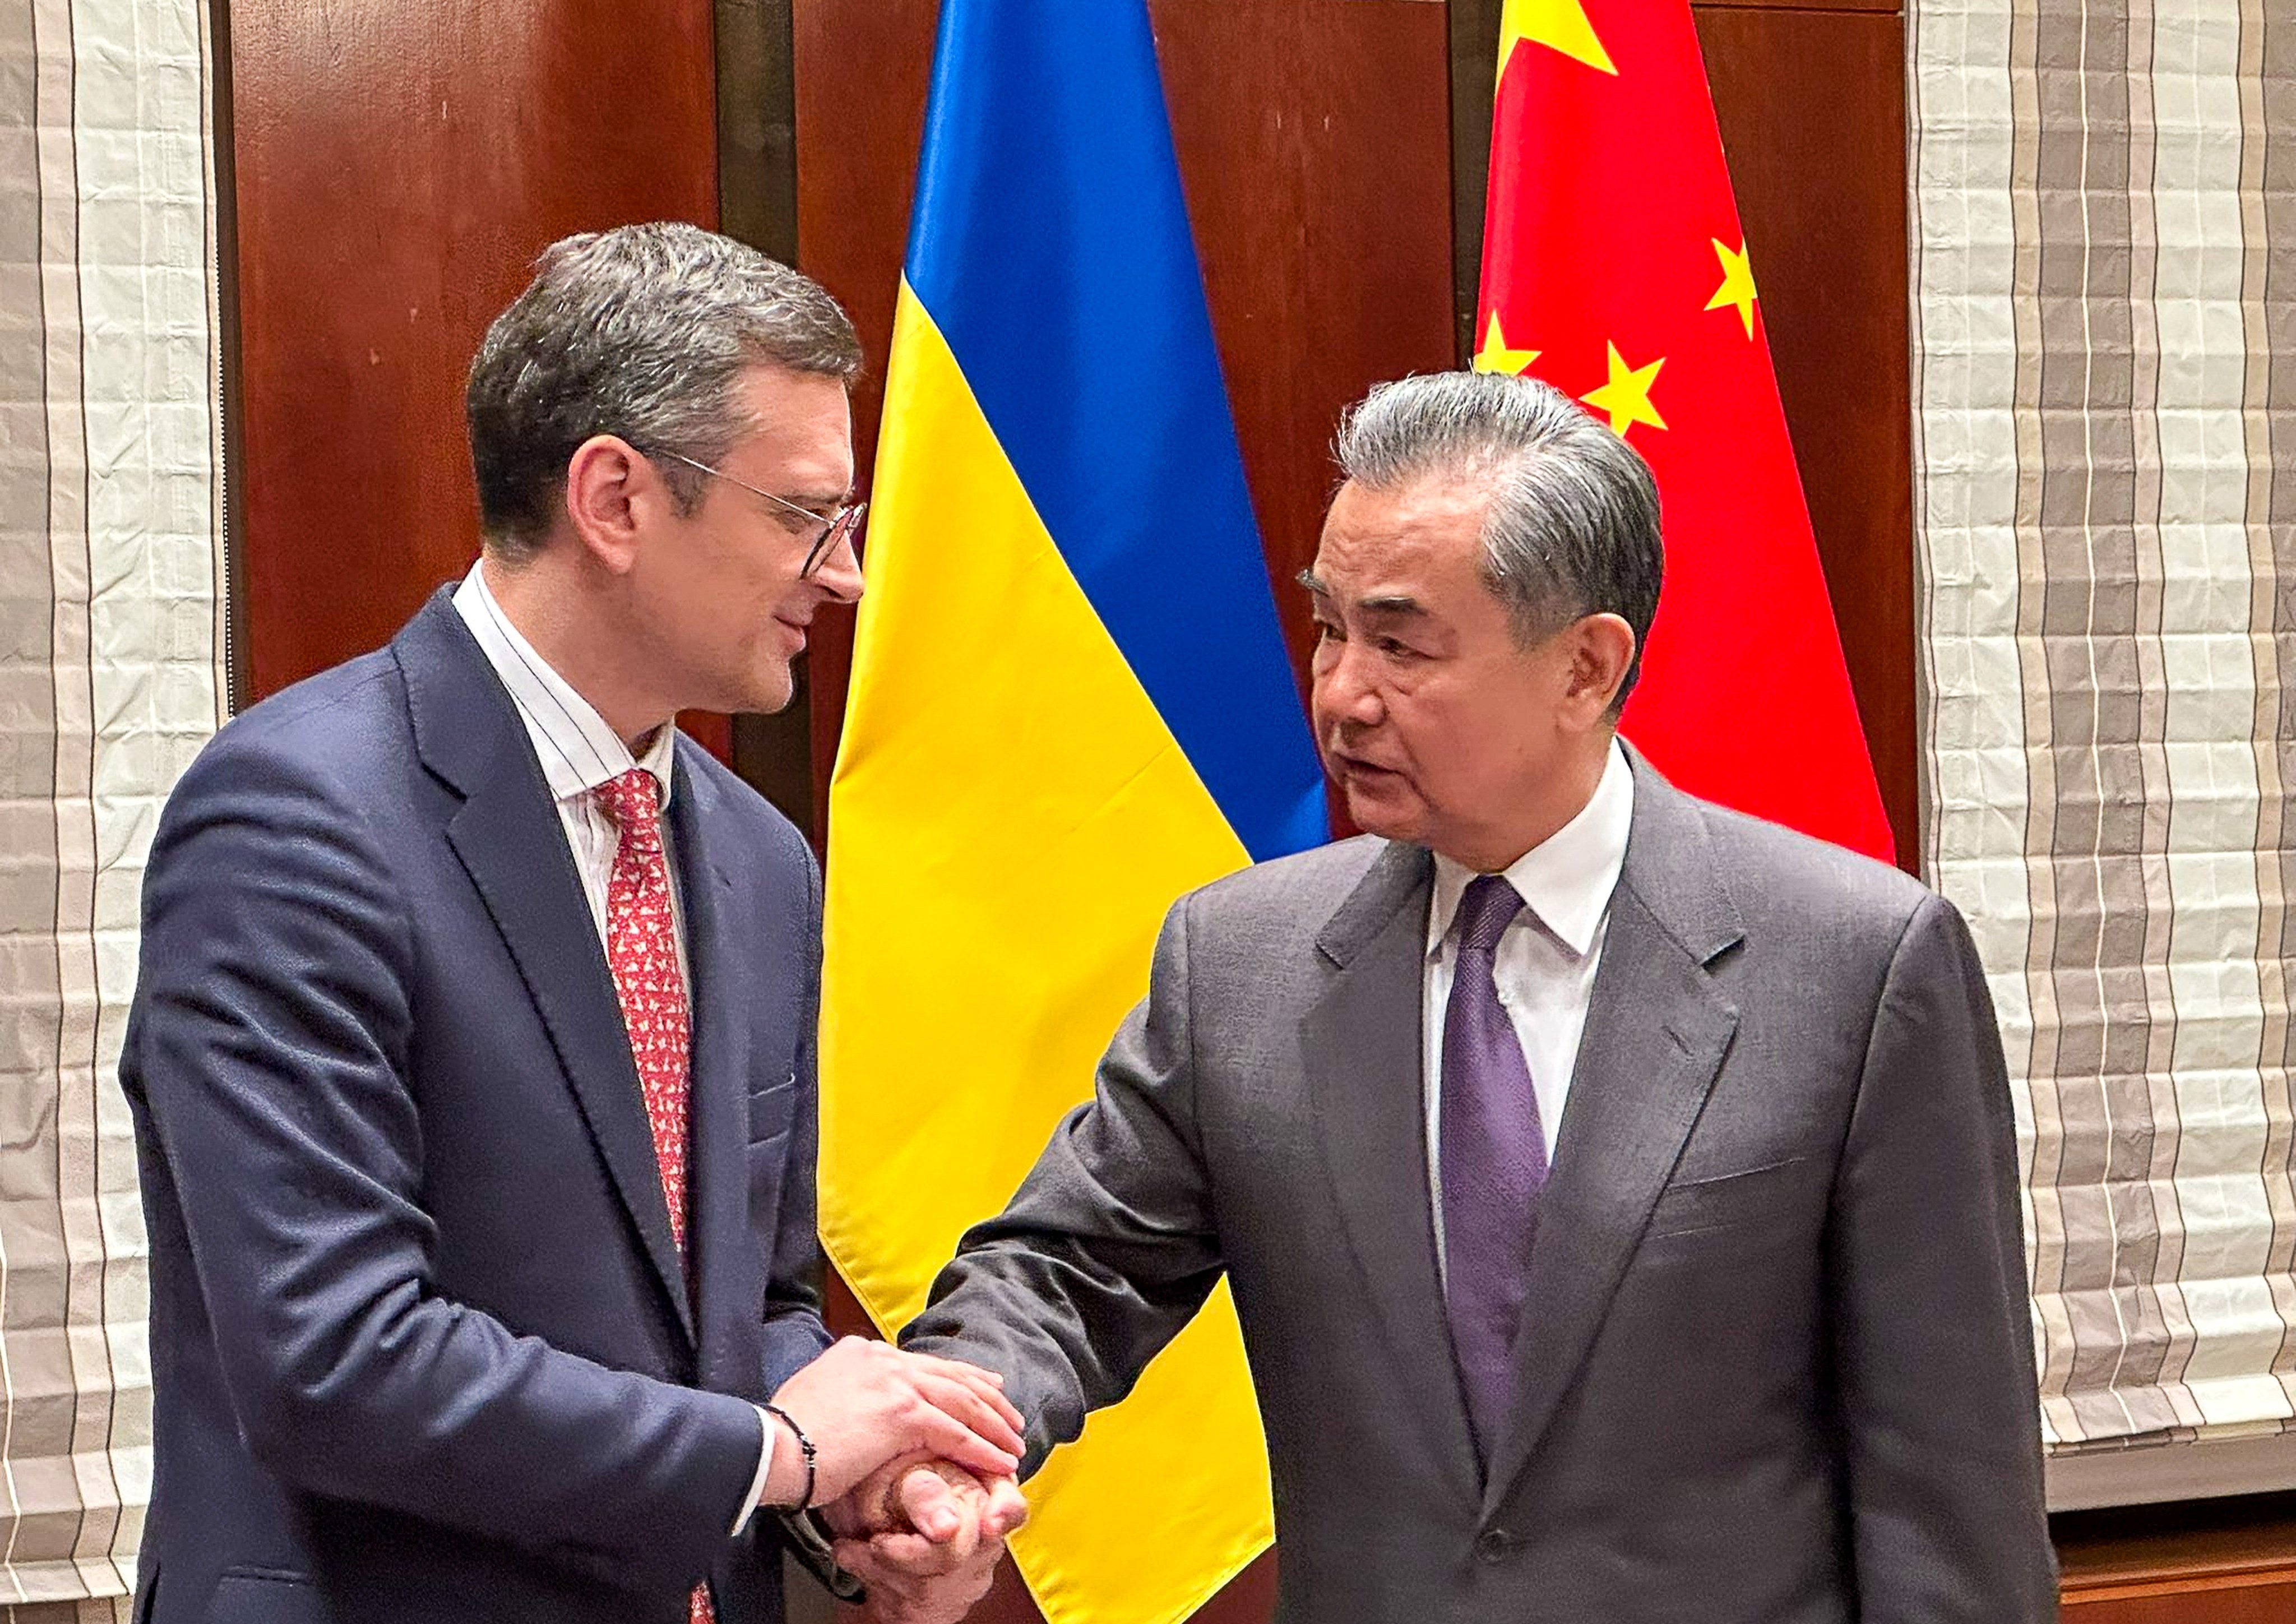 Chinese Foreign Minister Wang Yi (right) meets his Ukrainian counterpart Dmytro Kuleba in Munich on Saturday. Photo: X/ @DmytroKuleba